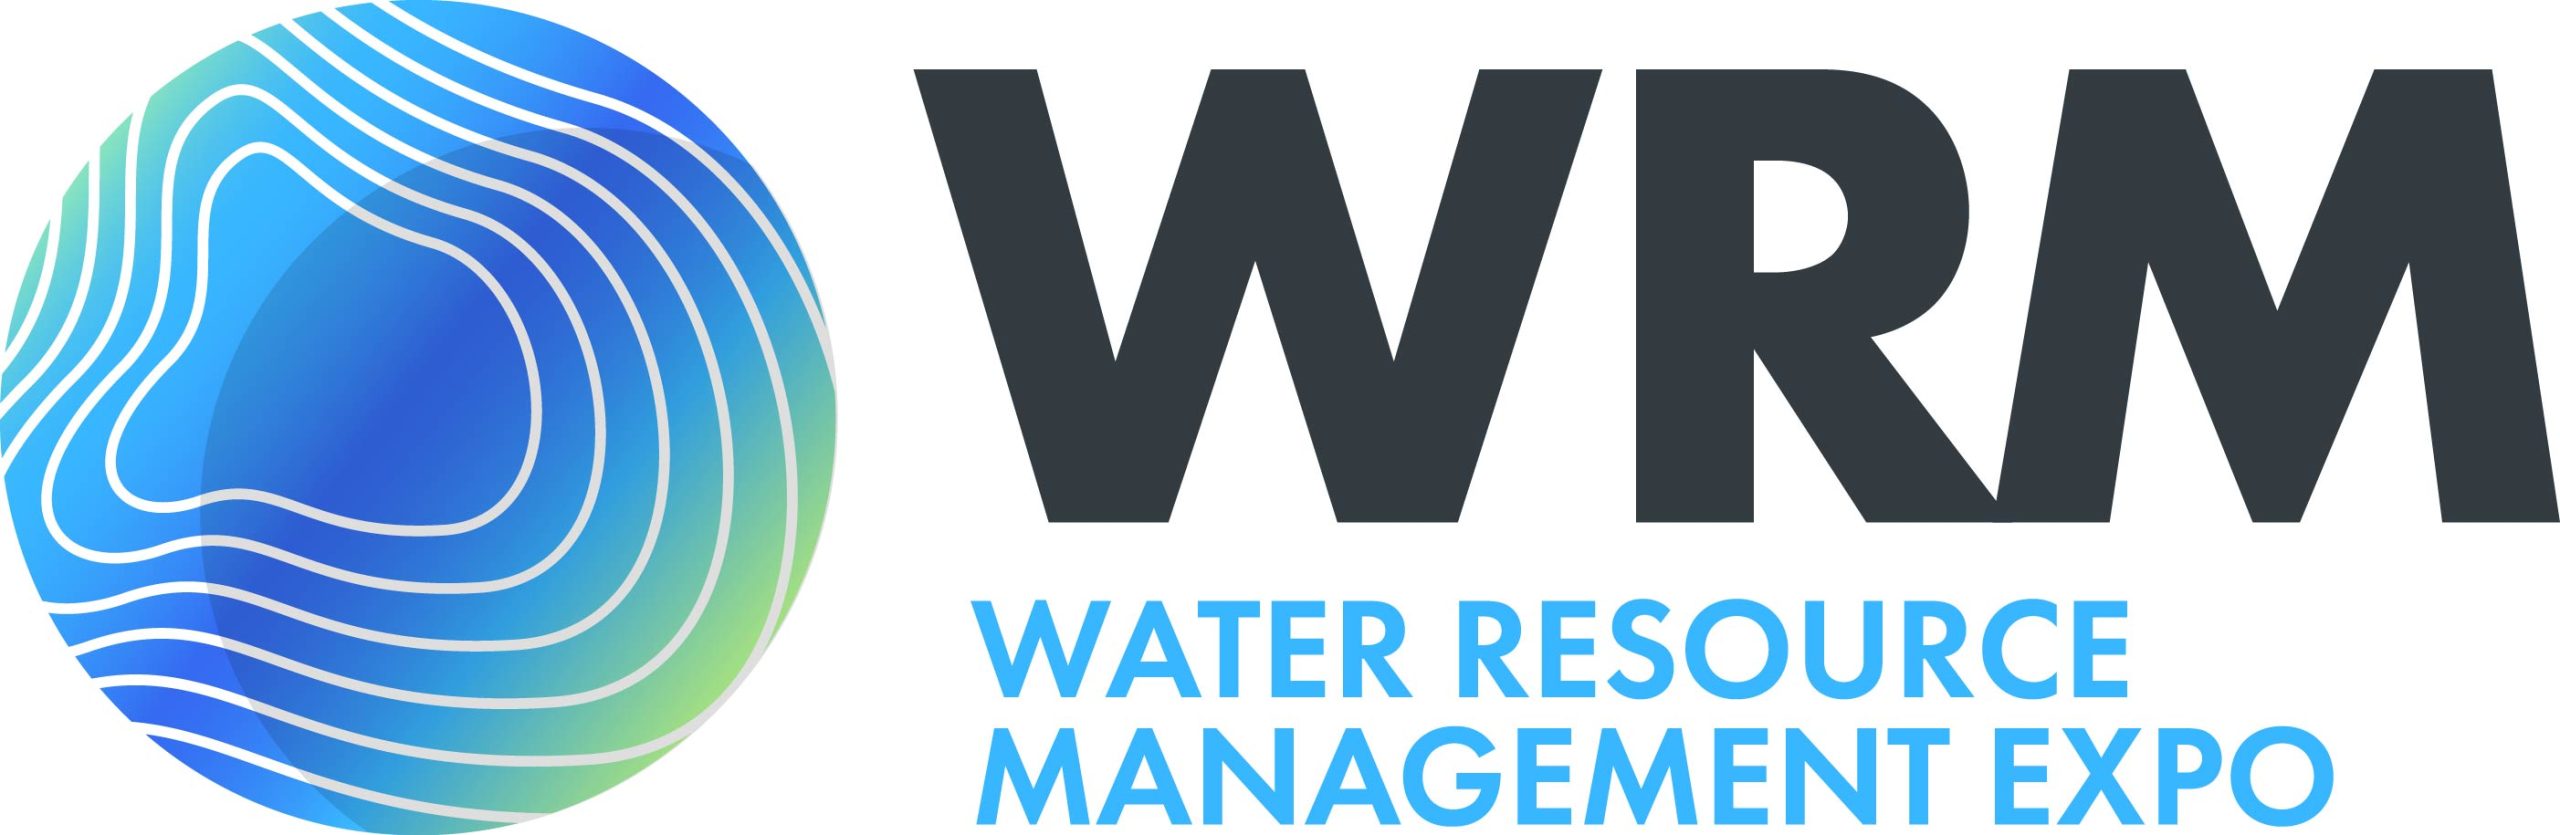 Water Resource Management Expo